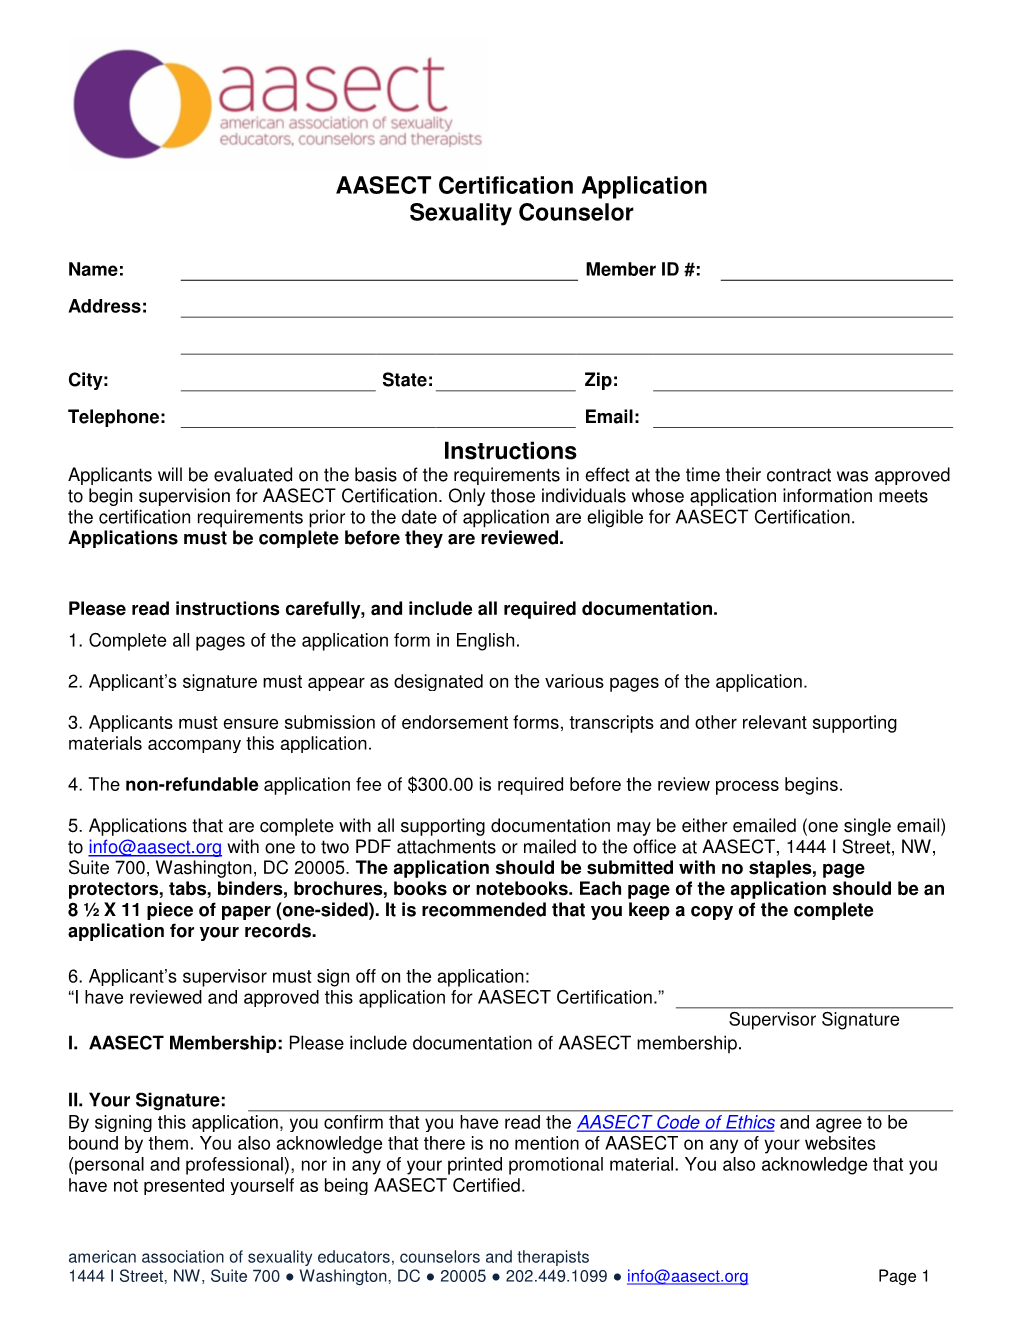 AASECT Certification Application Sexuality Counselor Instructions